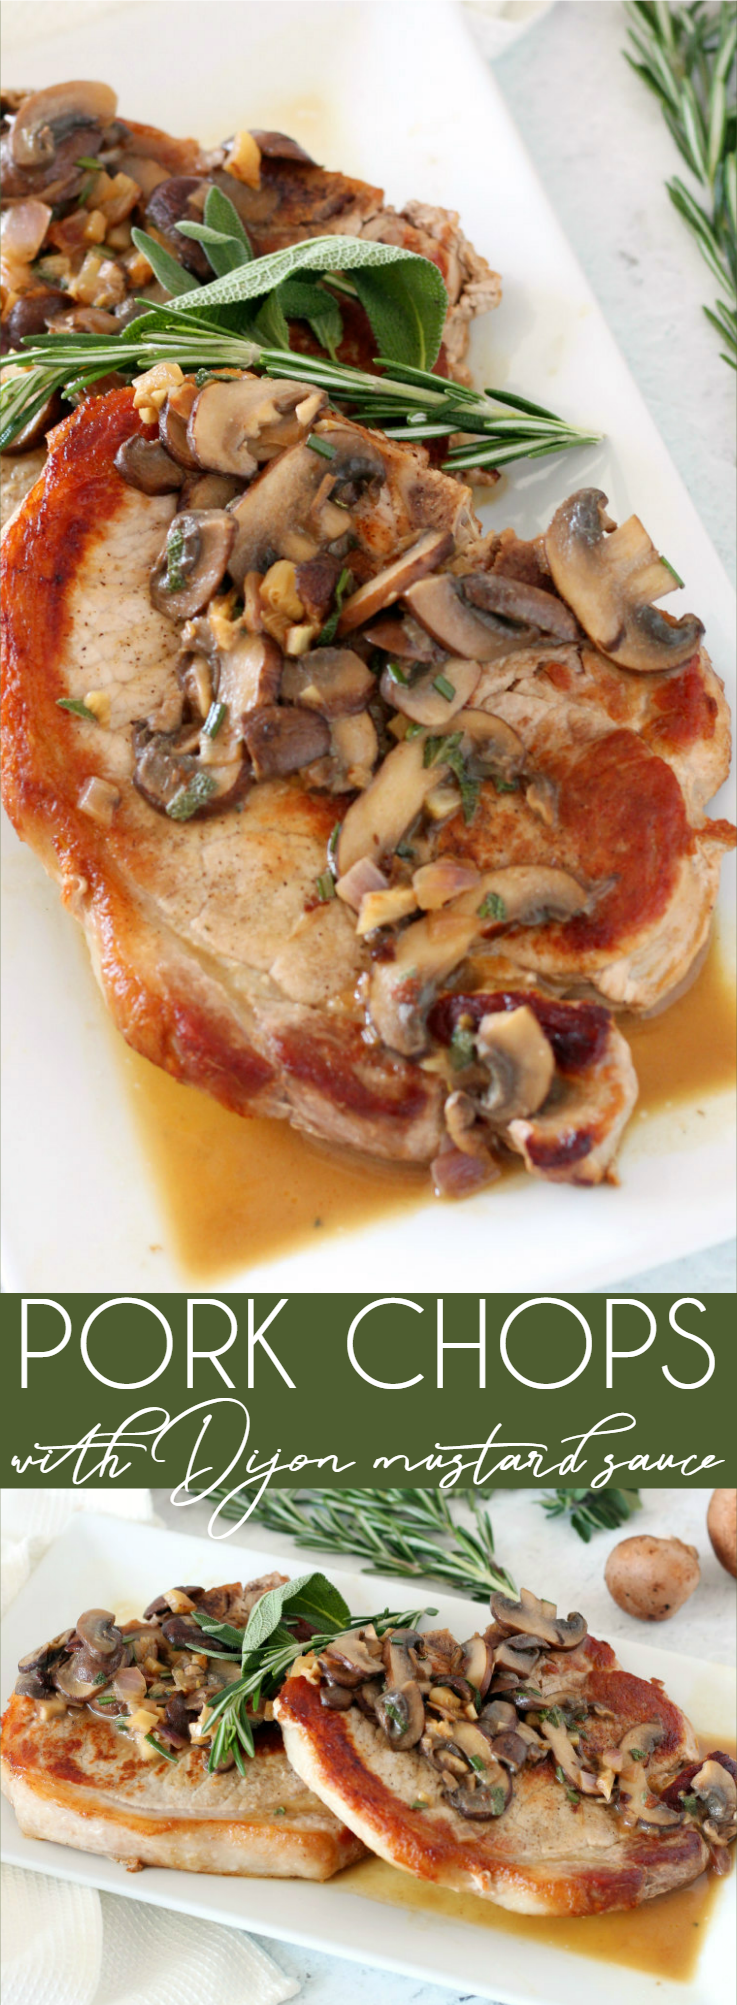 This 30-minute meal, Dijon Mustard Sauce Pork Chops for 2, is a French-inspired dish perfect for a weeknight dinner or date night. A budget-friendly dinner.